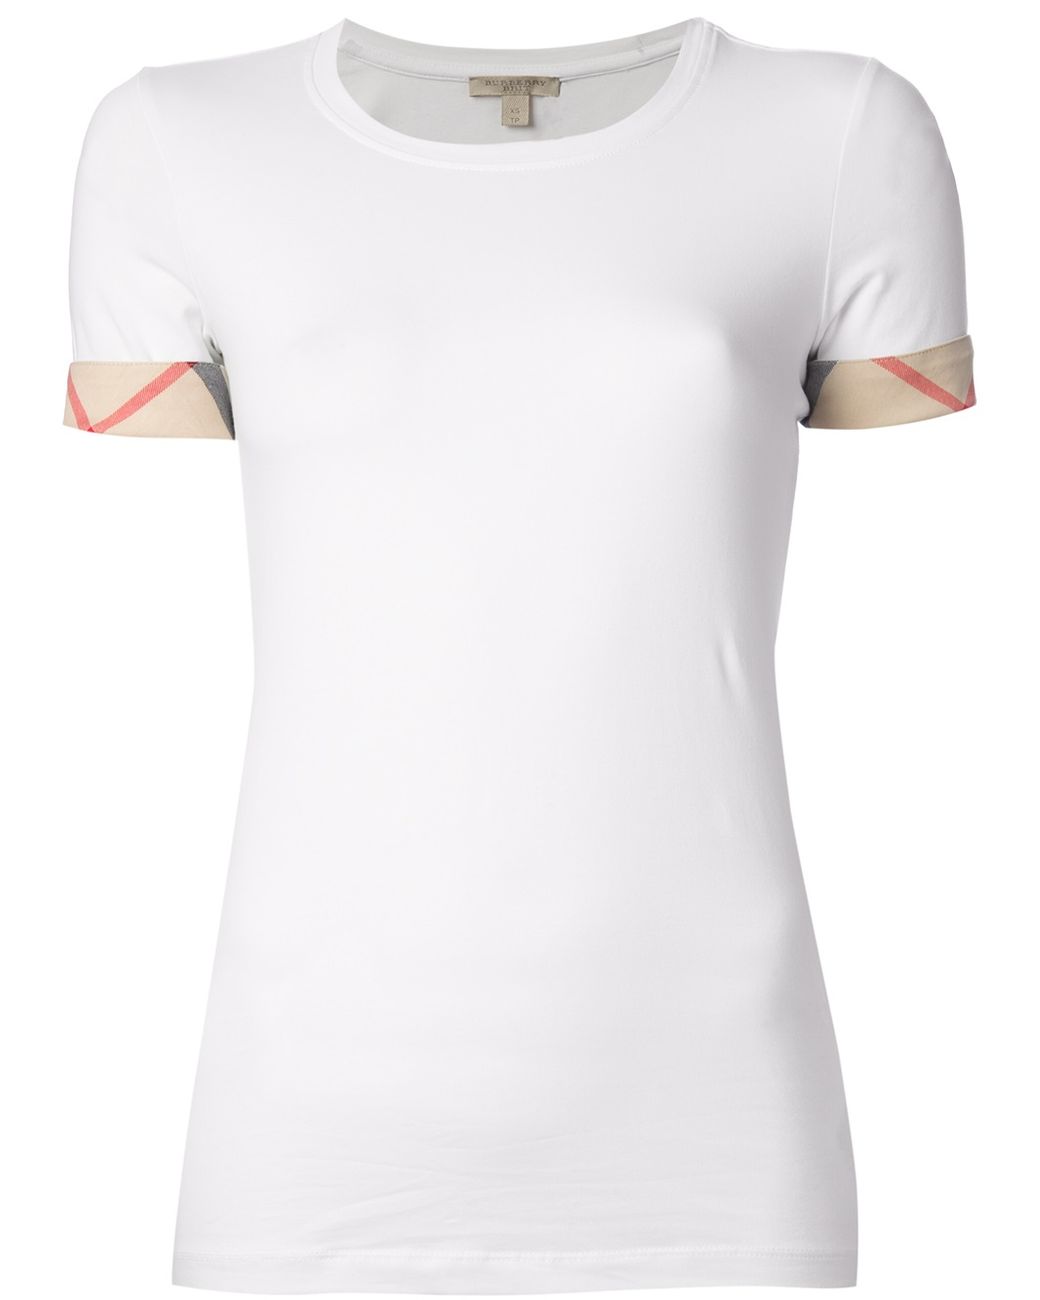 Burberry Brit Cotton 'house Check' Cuffs T-shirt in White | Lyst